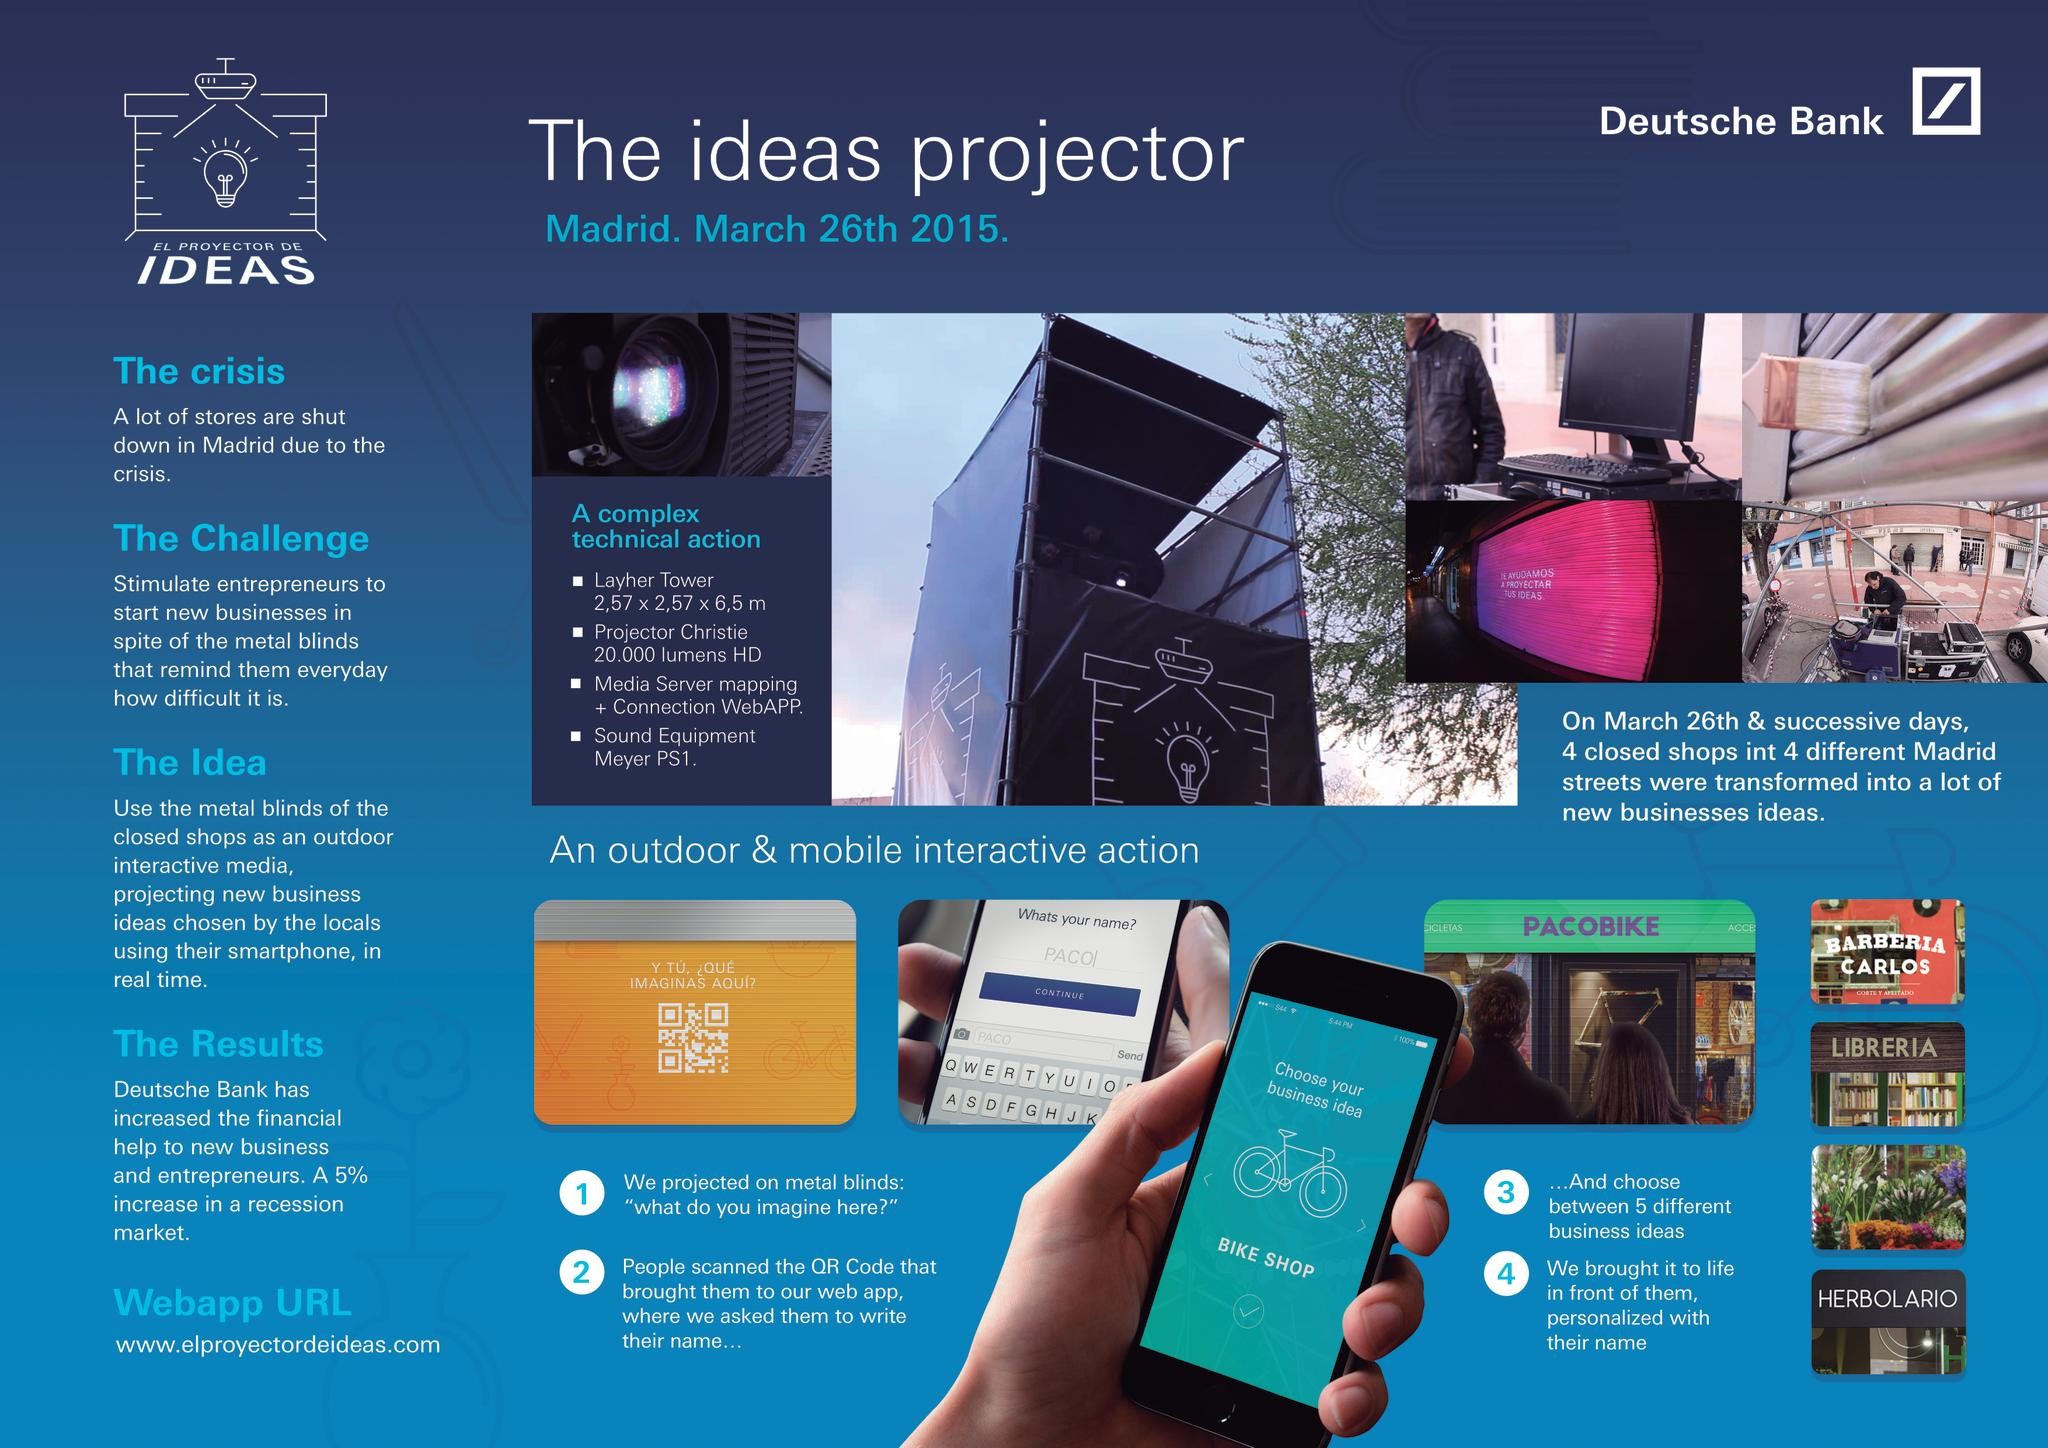 THE IDEAS PROJECTOR